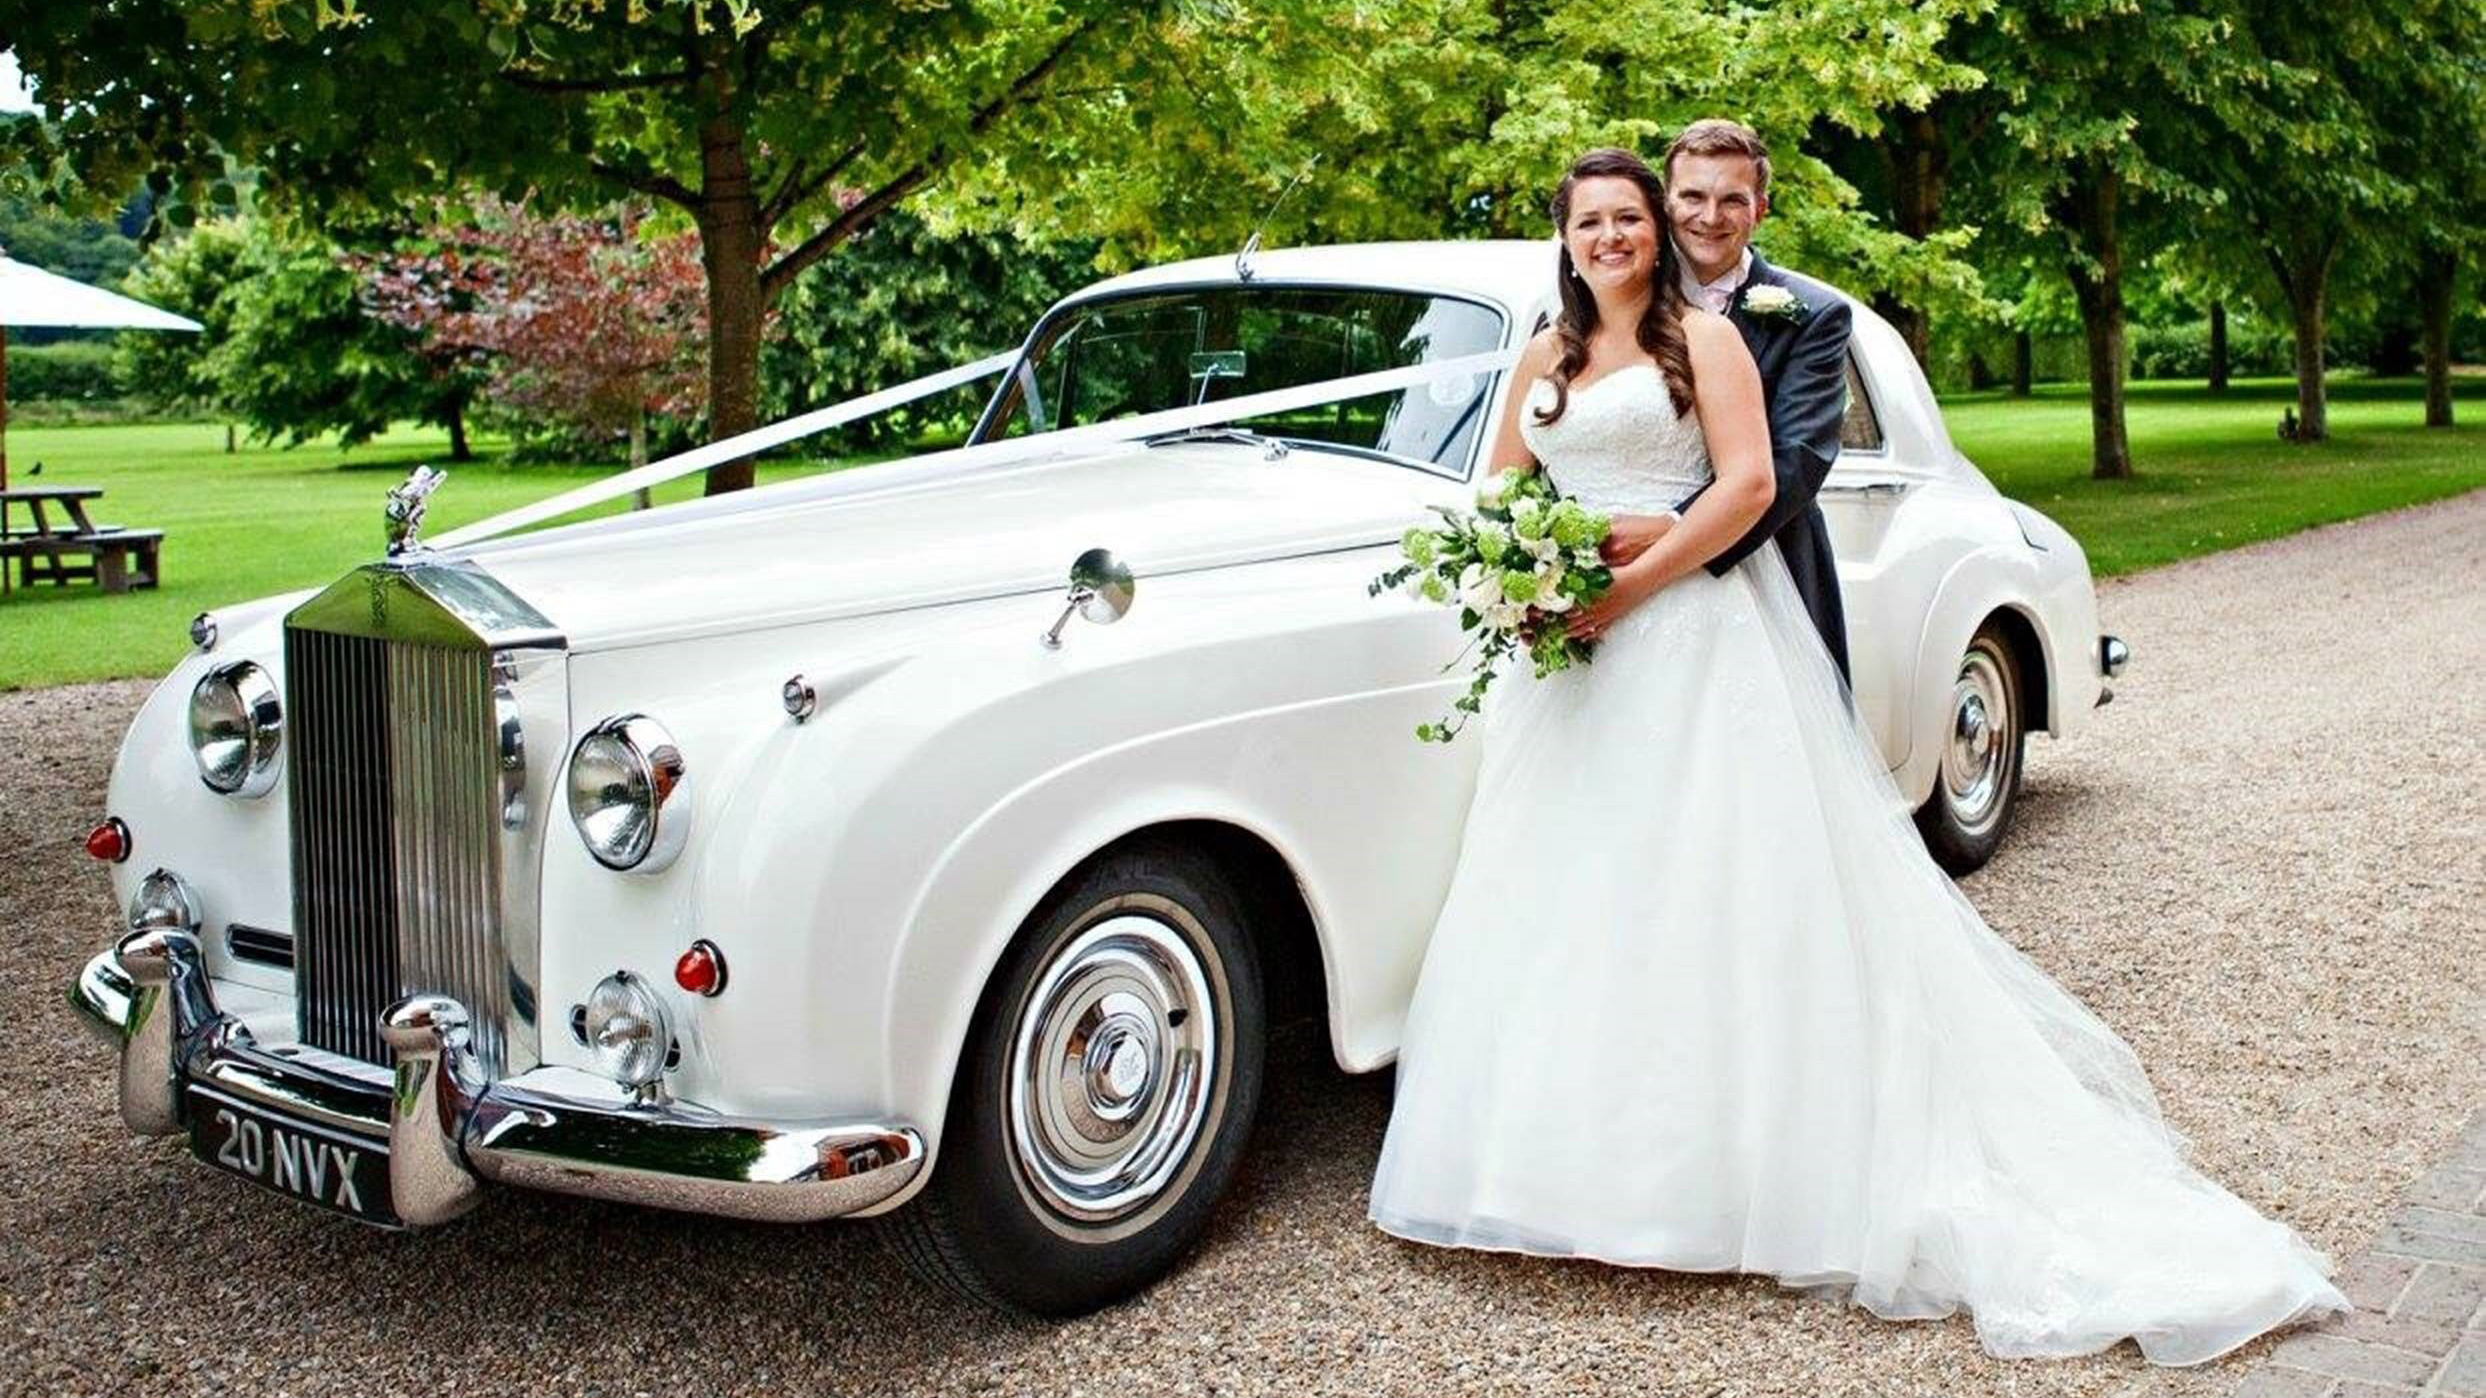 White Rolls-Royce Silver cloud decorated with ivory ribbons parked in the entrance of a wedding venue in Bedford. Bride and Groom are standing by the vehicle. Groom is holding his Bride in his arms while she holds her bridal bouquet.